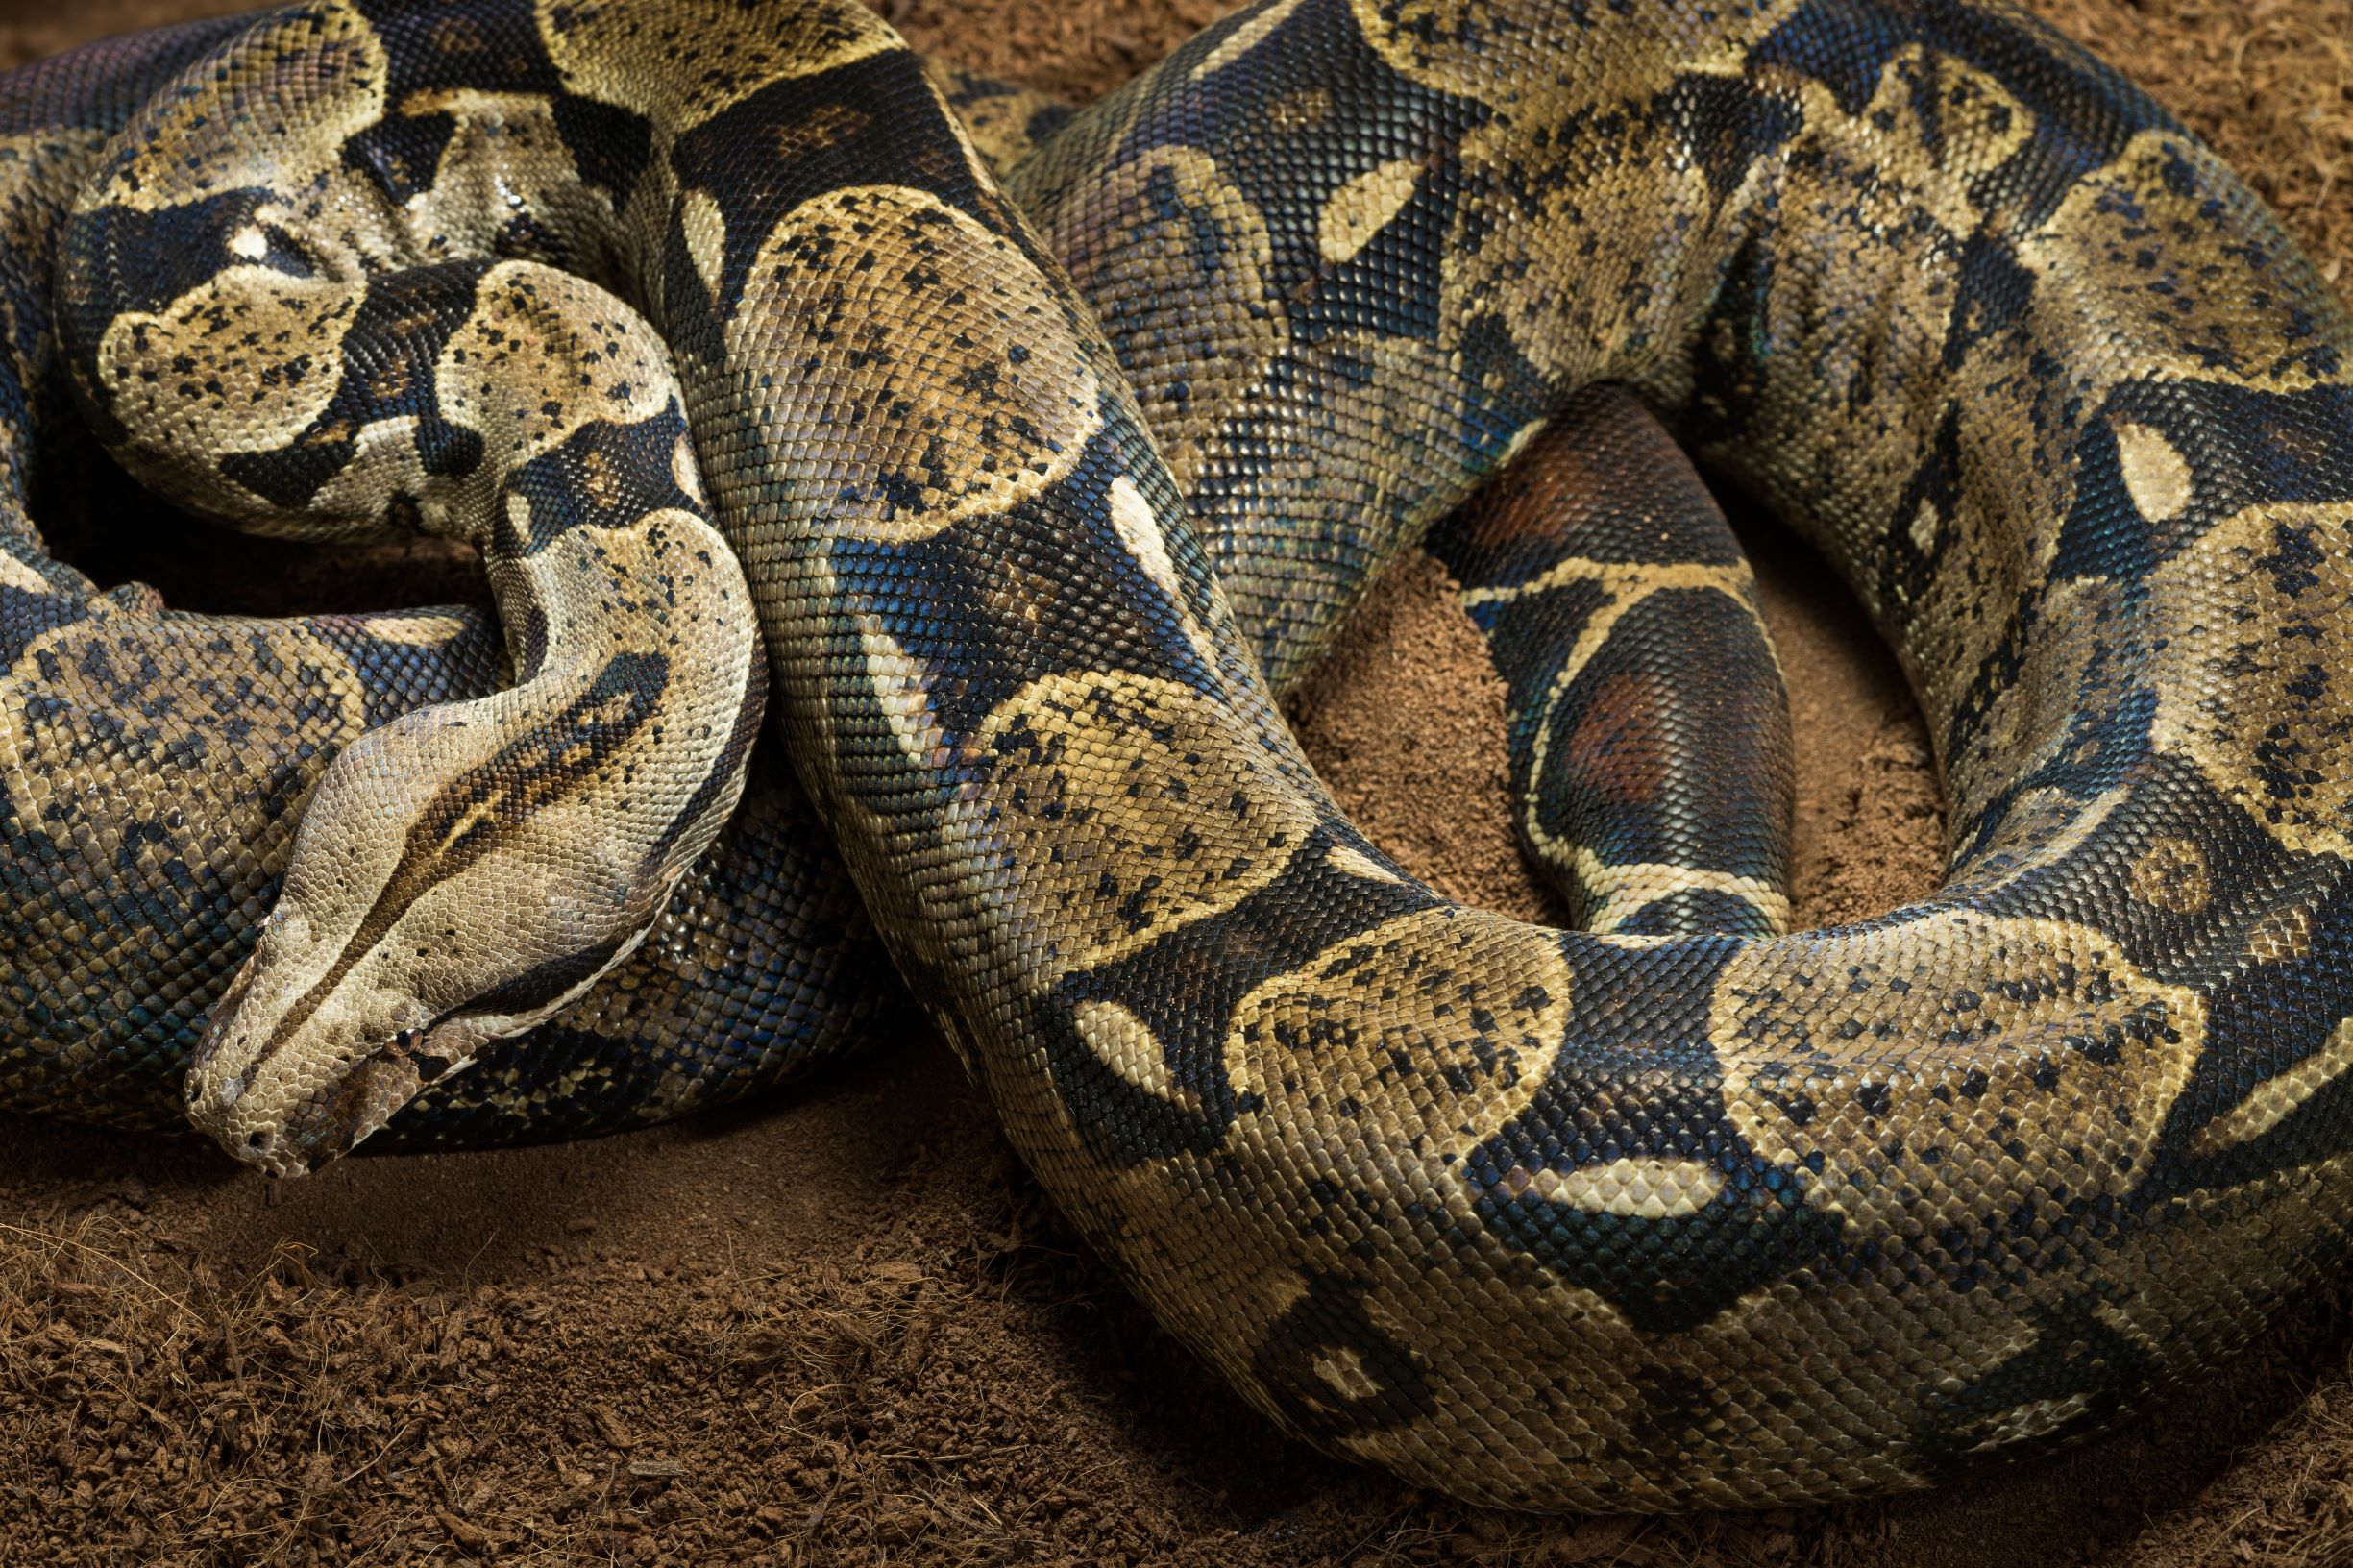 A Common Boa showing the typical colour and pattern of the species